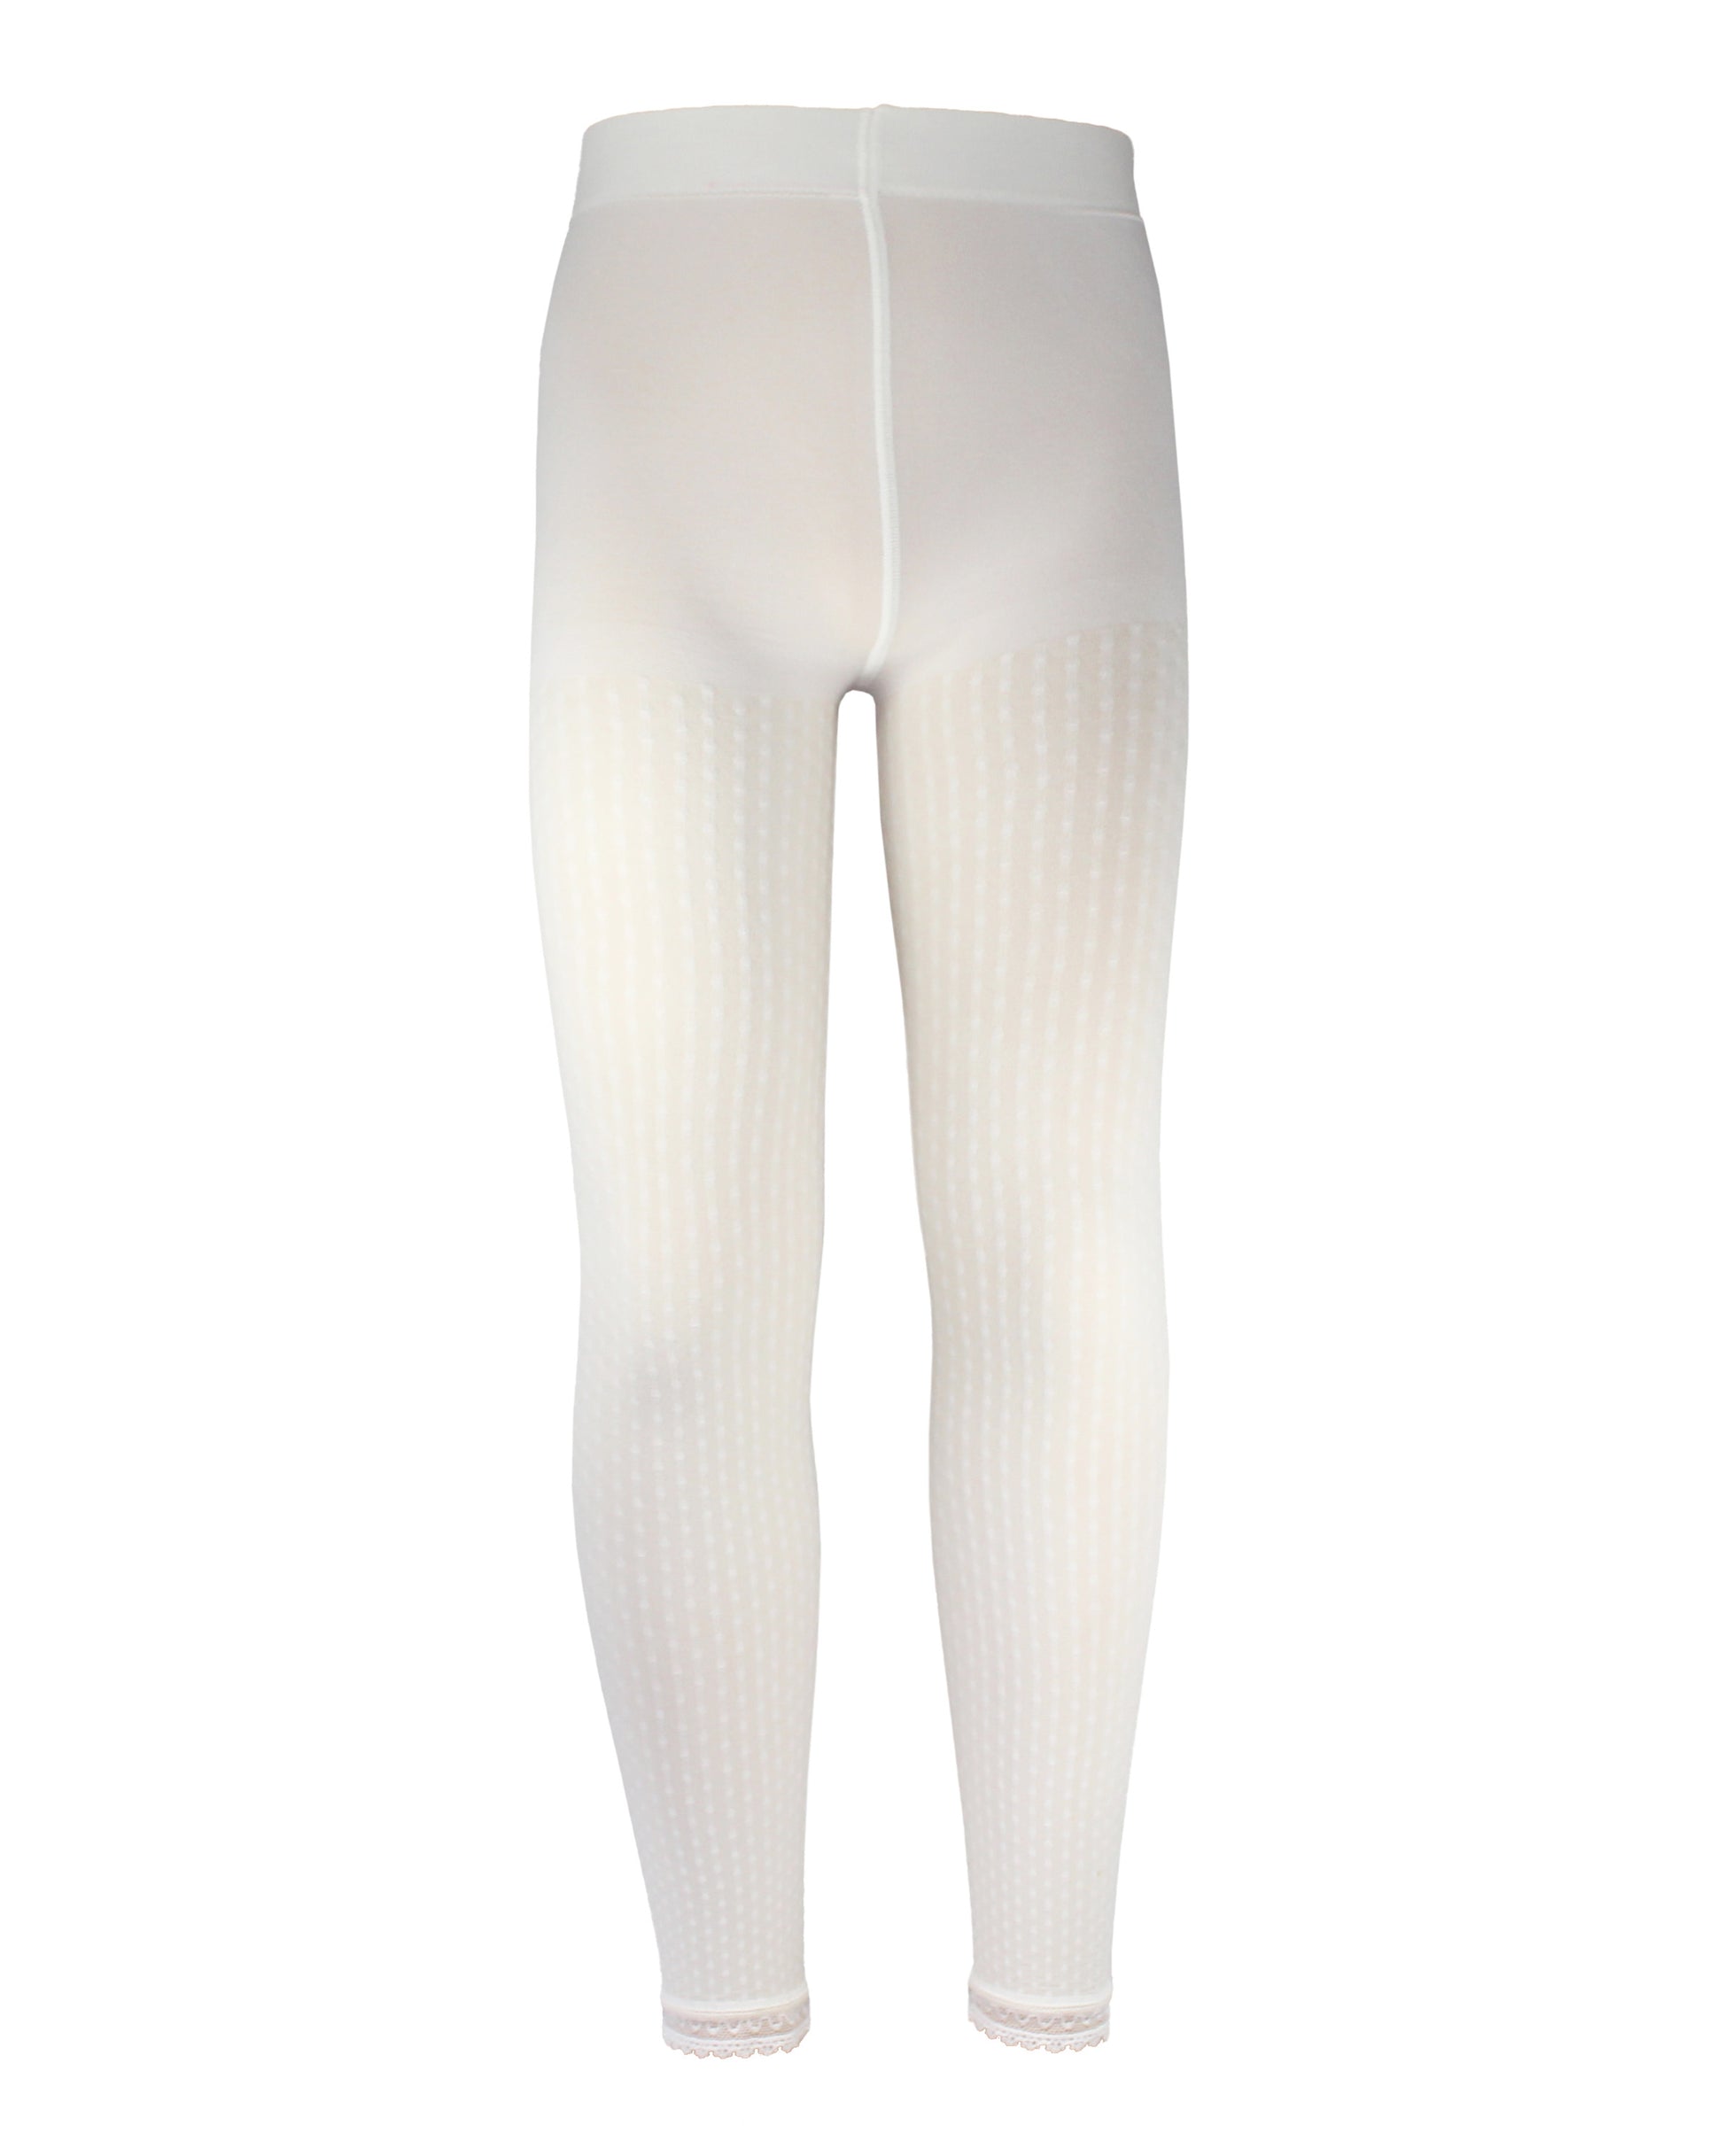 Omsa Caramel Pantacollant - Soft opaque cream footless tights with a textured floral pinstripe pattern and lace trim cuff.